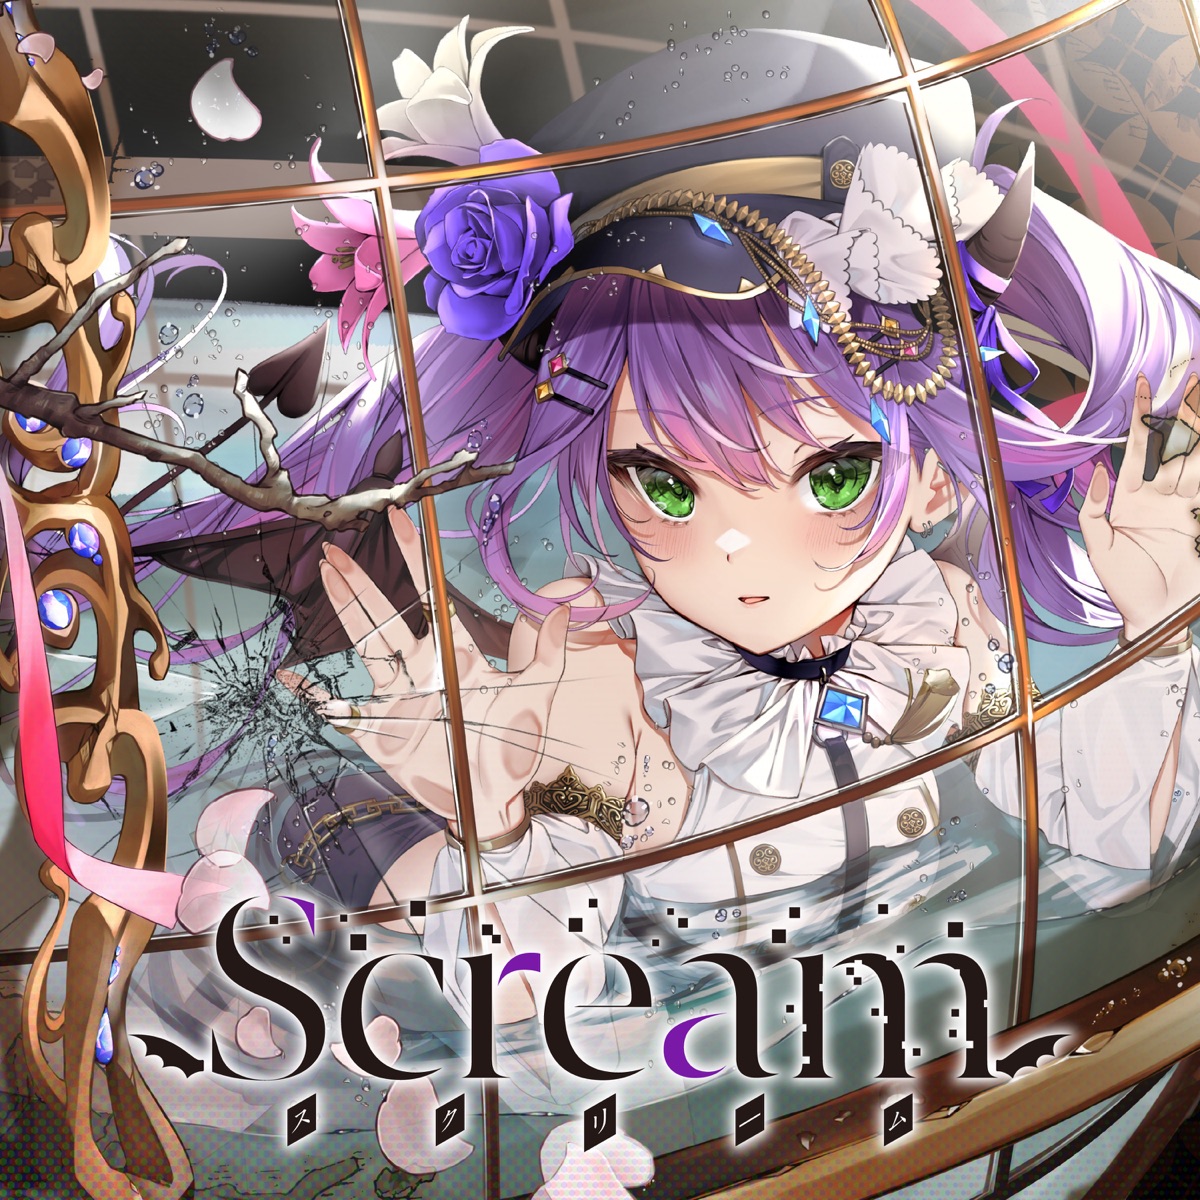 Cover for『Tokoyami Towa - FACT』from the release『Scream』